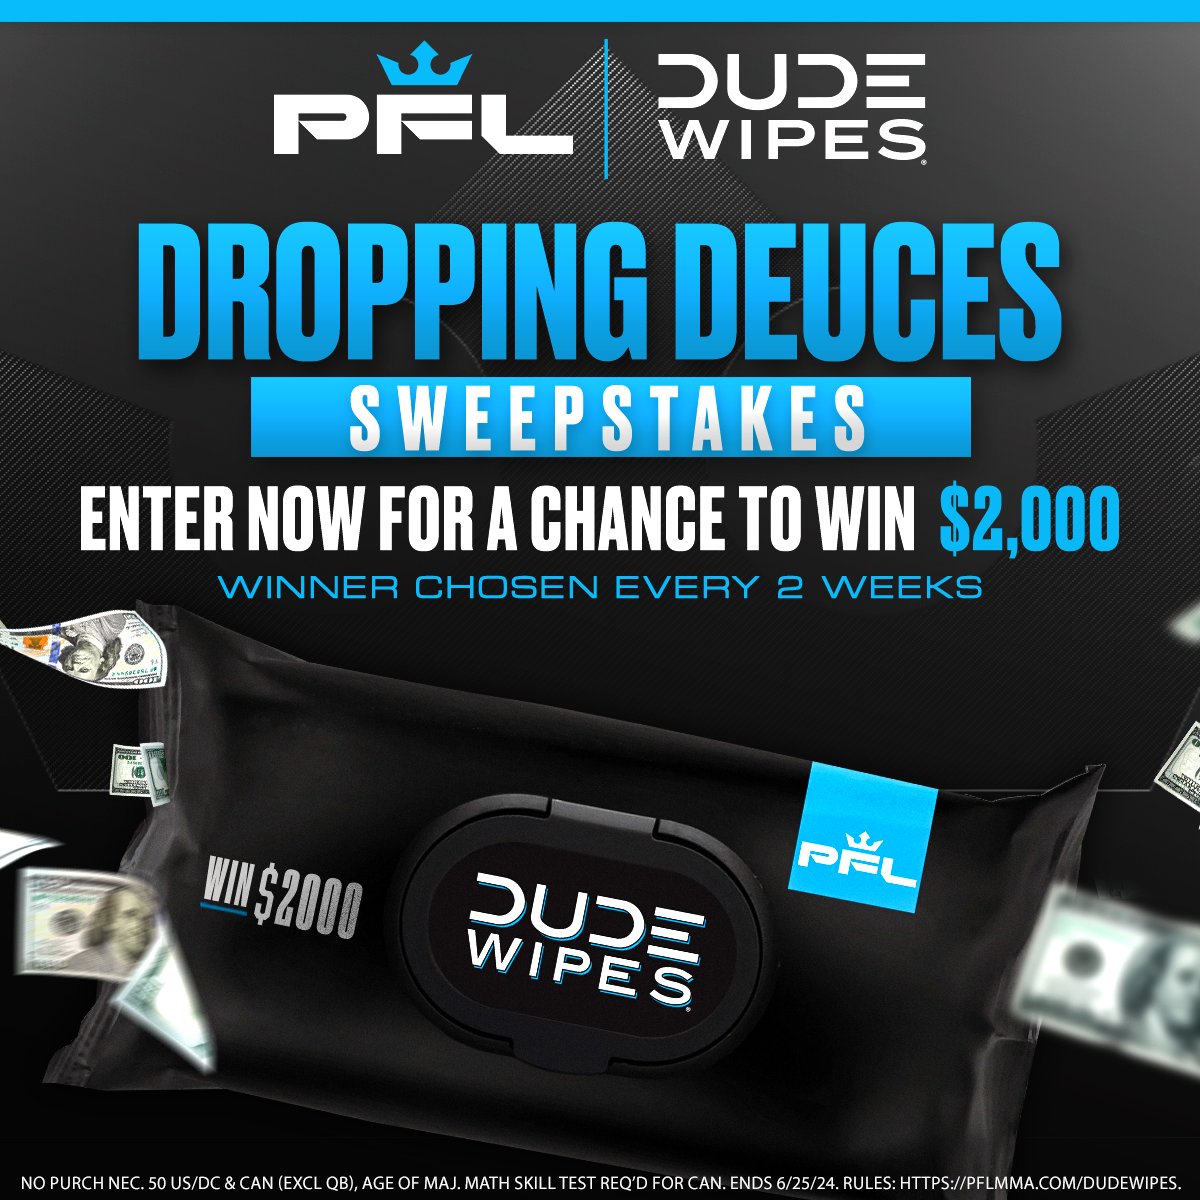 𝘿𝙧𝙤𝙥𝙥𝙞𝙣𝙜 𝘿𝙚𝙪𝙘𝙚𝙨 𝙎𝙬𝙚𝙚𝙥𝙨𝙩𝙖𝙠𝙚𝙨 💸💸 @DUDEwipes is giving away $2,000 every 2⃣weeks 🔗pfl.info/Sweepstakes No Purch Nec. 50 US/DC & CAN (excl QB), Age of maj. Math skill test req’d for CAN. Ends 6/25/24. Rules: pflmma.com/dudewipes.